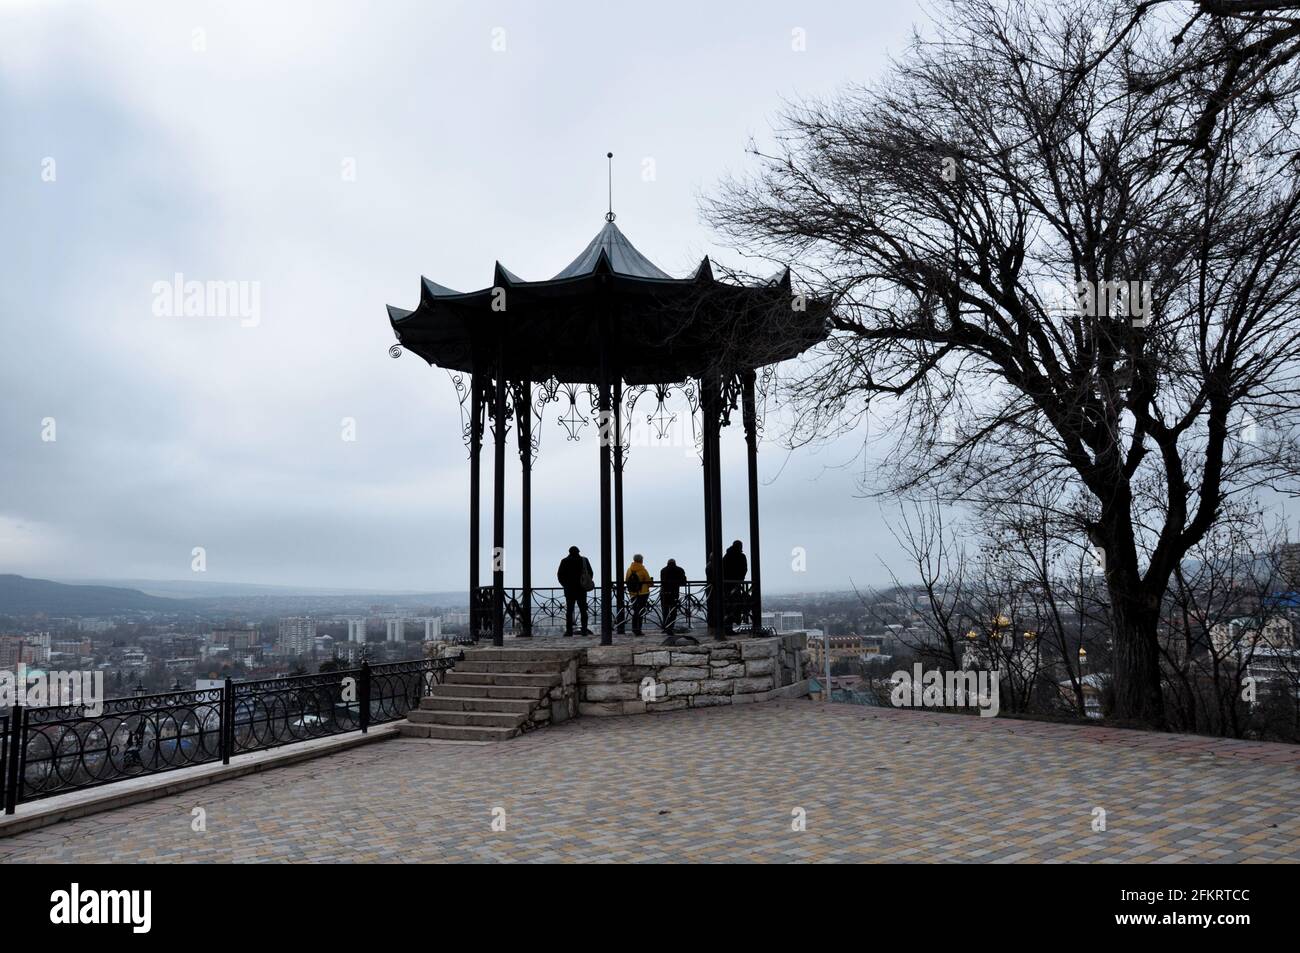 Pyatigorsk, Russia - March 23, 2021: Panoramic view of Pyatigorsk from observation deck near the Chinese arbor, resorts of the Caucasus Mineral waters Stock Photo